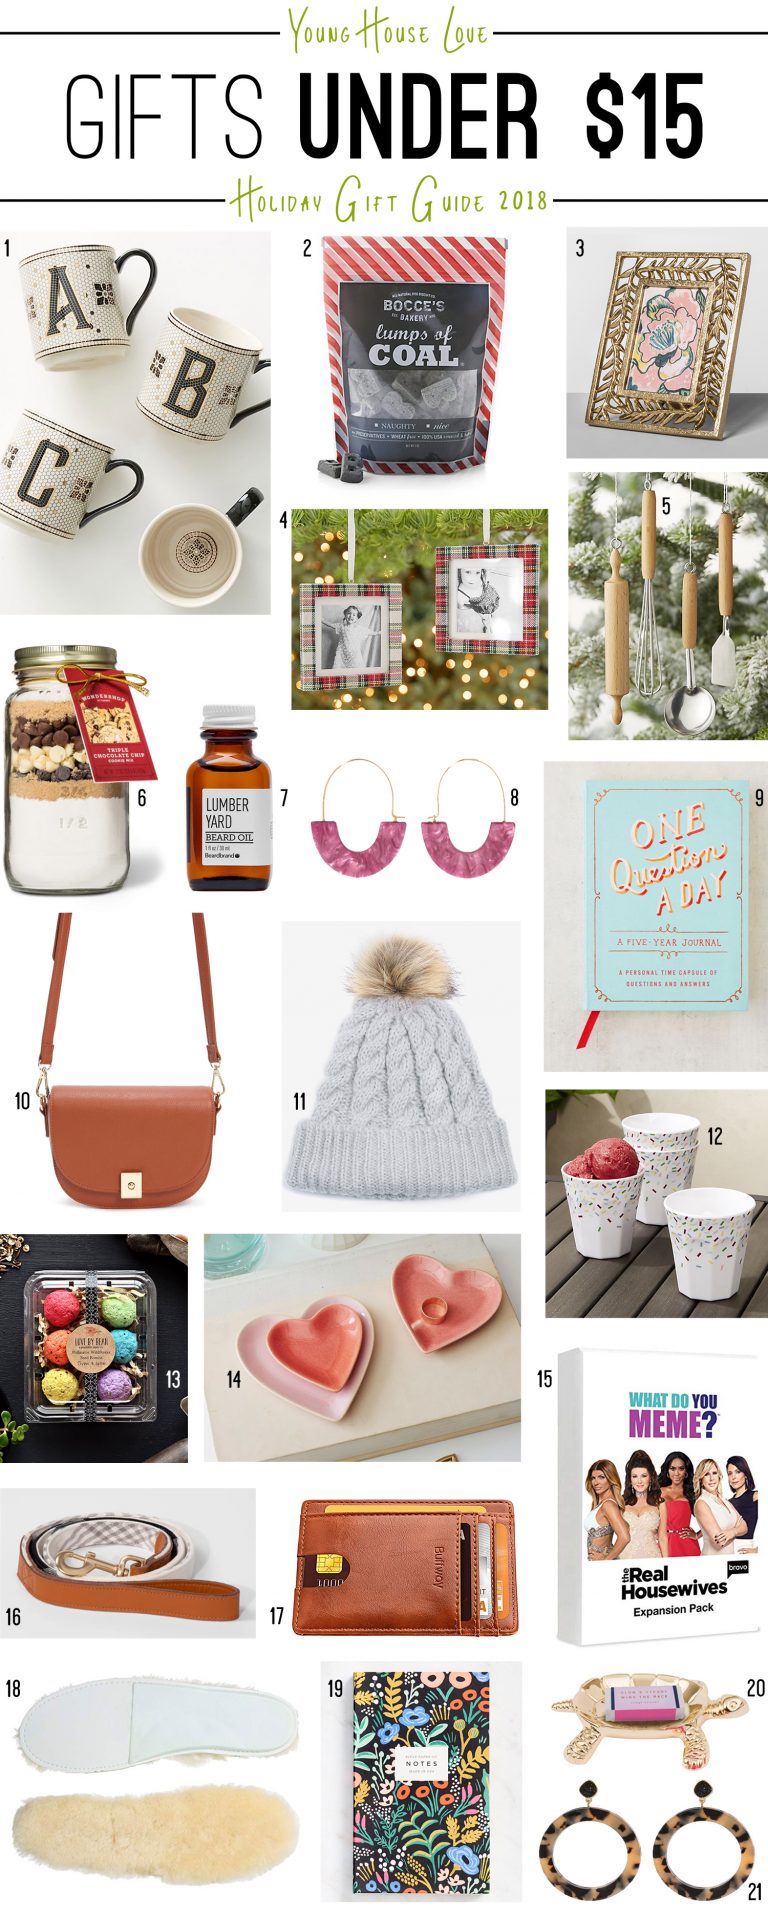 2018 Holiday Gift Guides - Under $20! | Young House Love